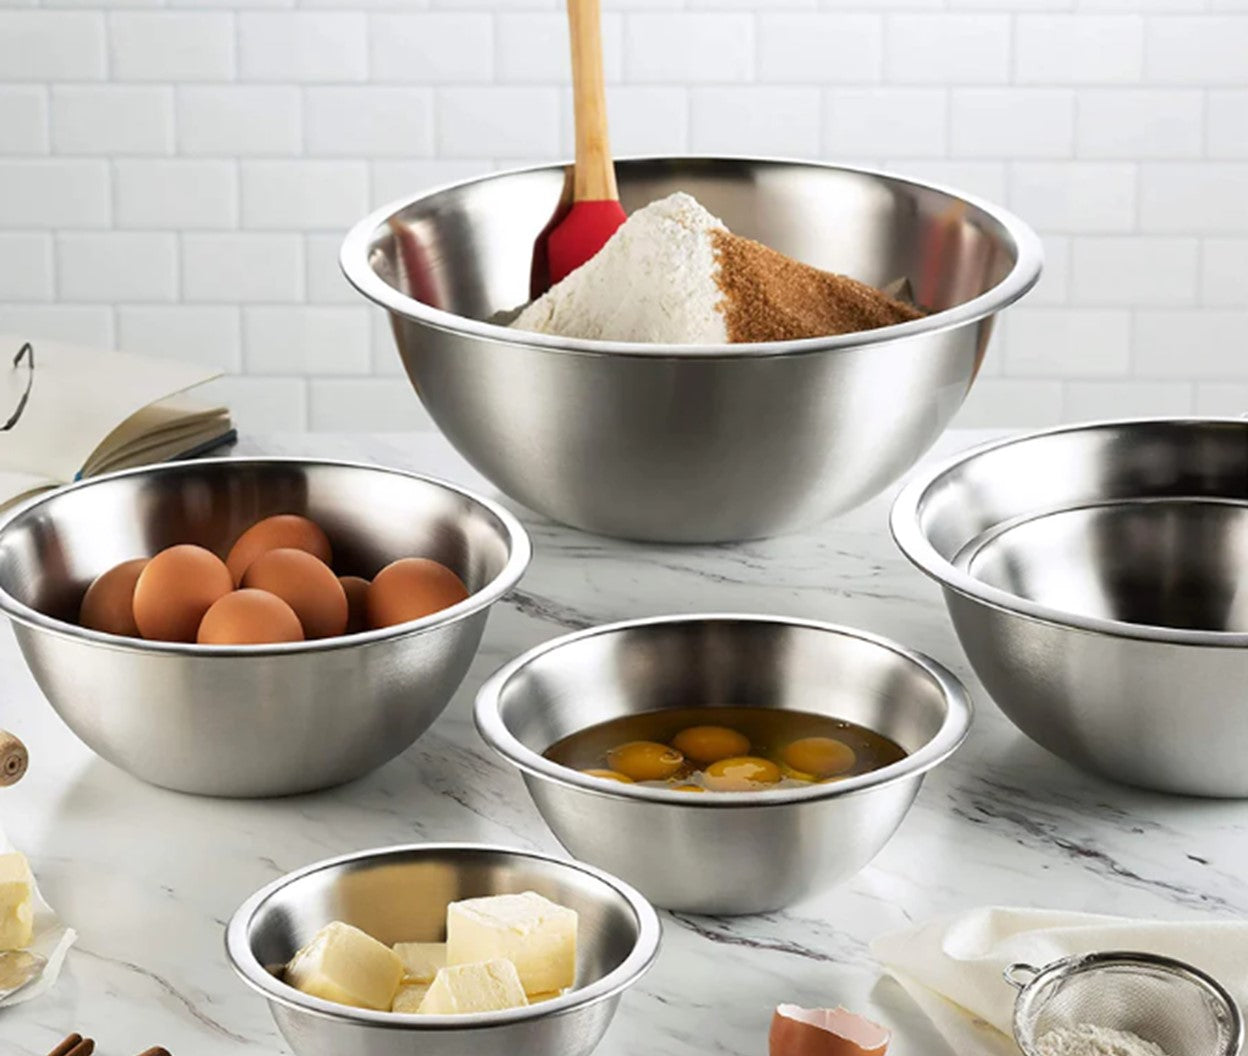 Lexi Home Stainless Steel Mixing Bowl Set - 2 Piece Suctioning Bowl Se -  Lexi Home